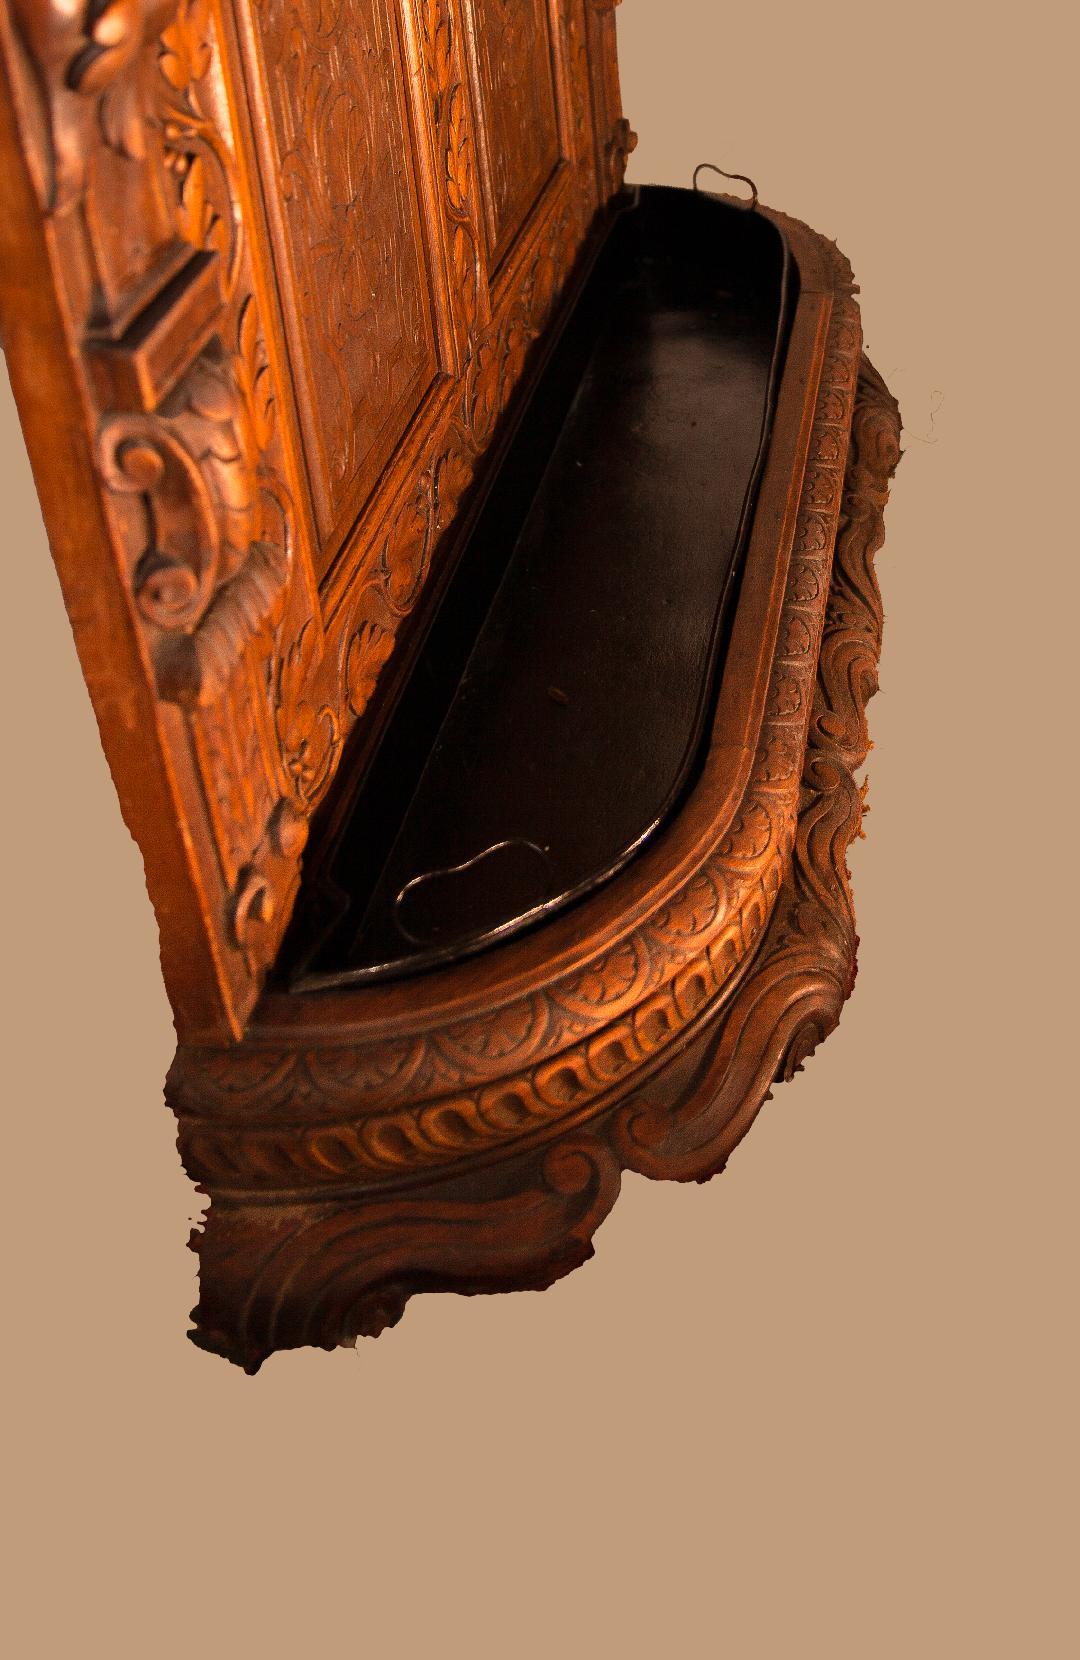 An outstanding hand carved Black Forest Hall stand, circa 1890 in solid oak. This is of the highest quality and craftsmanship with cast brass fittings of mythical dolphins and will grace any grand entryway. 
These Black Forest pieces are very hard